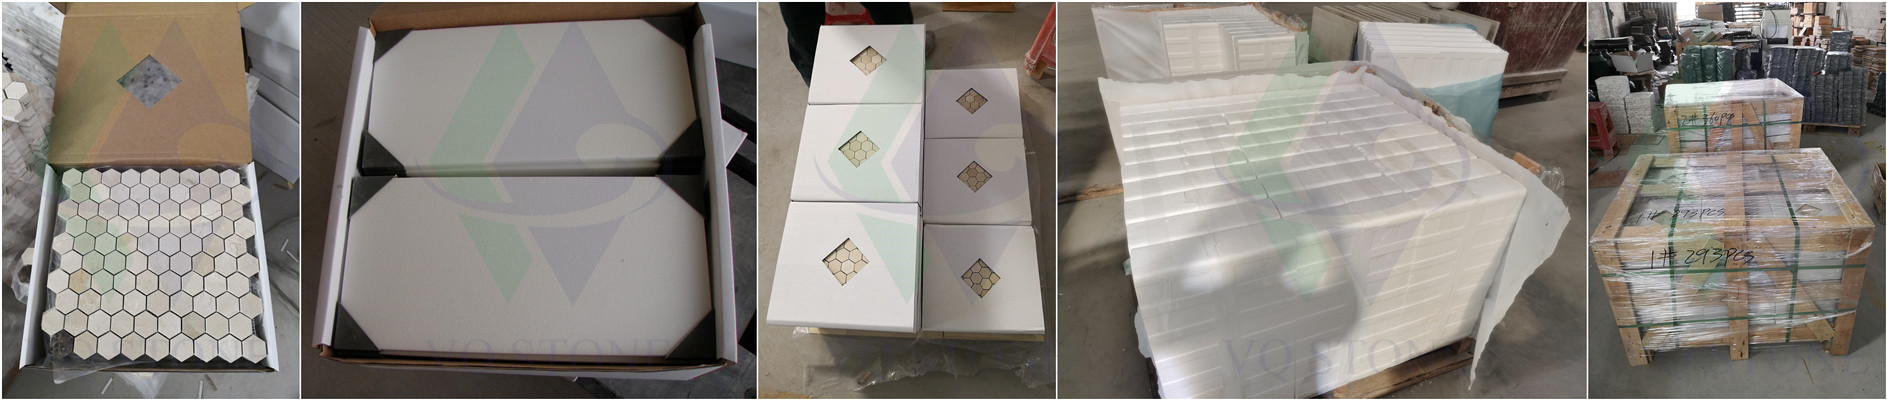 Mosaic & Thin Tile Packing and Loading.jpg